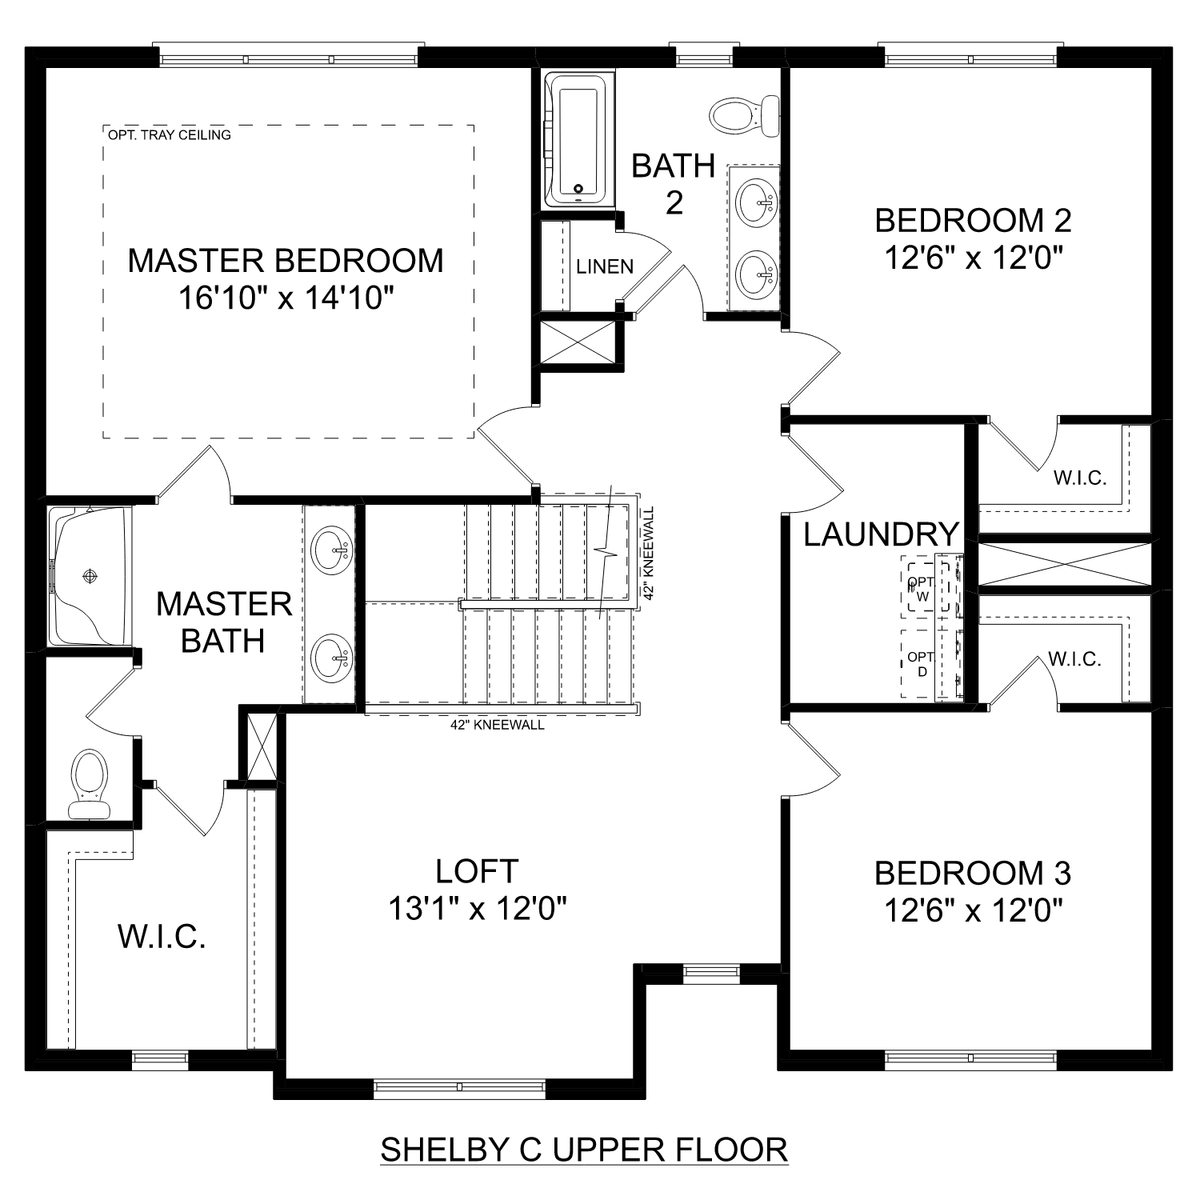 2 - The Shelby C - Side Entry floor plan layout for 123 Ivy Vine Drive in Davidson Homes' Ivy Hills community.